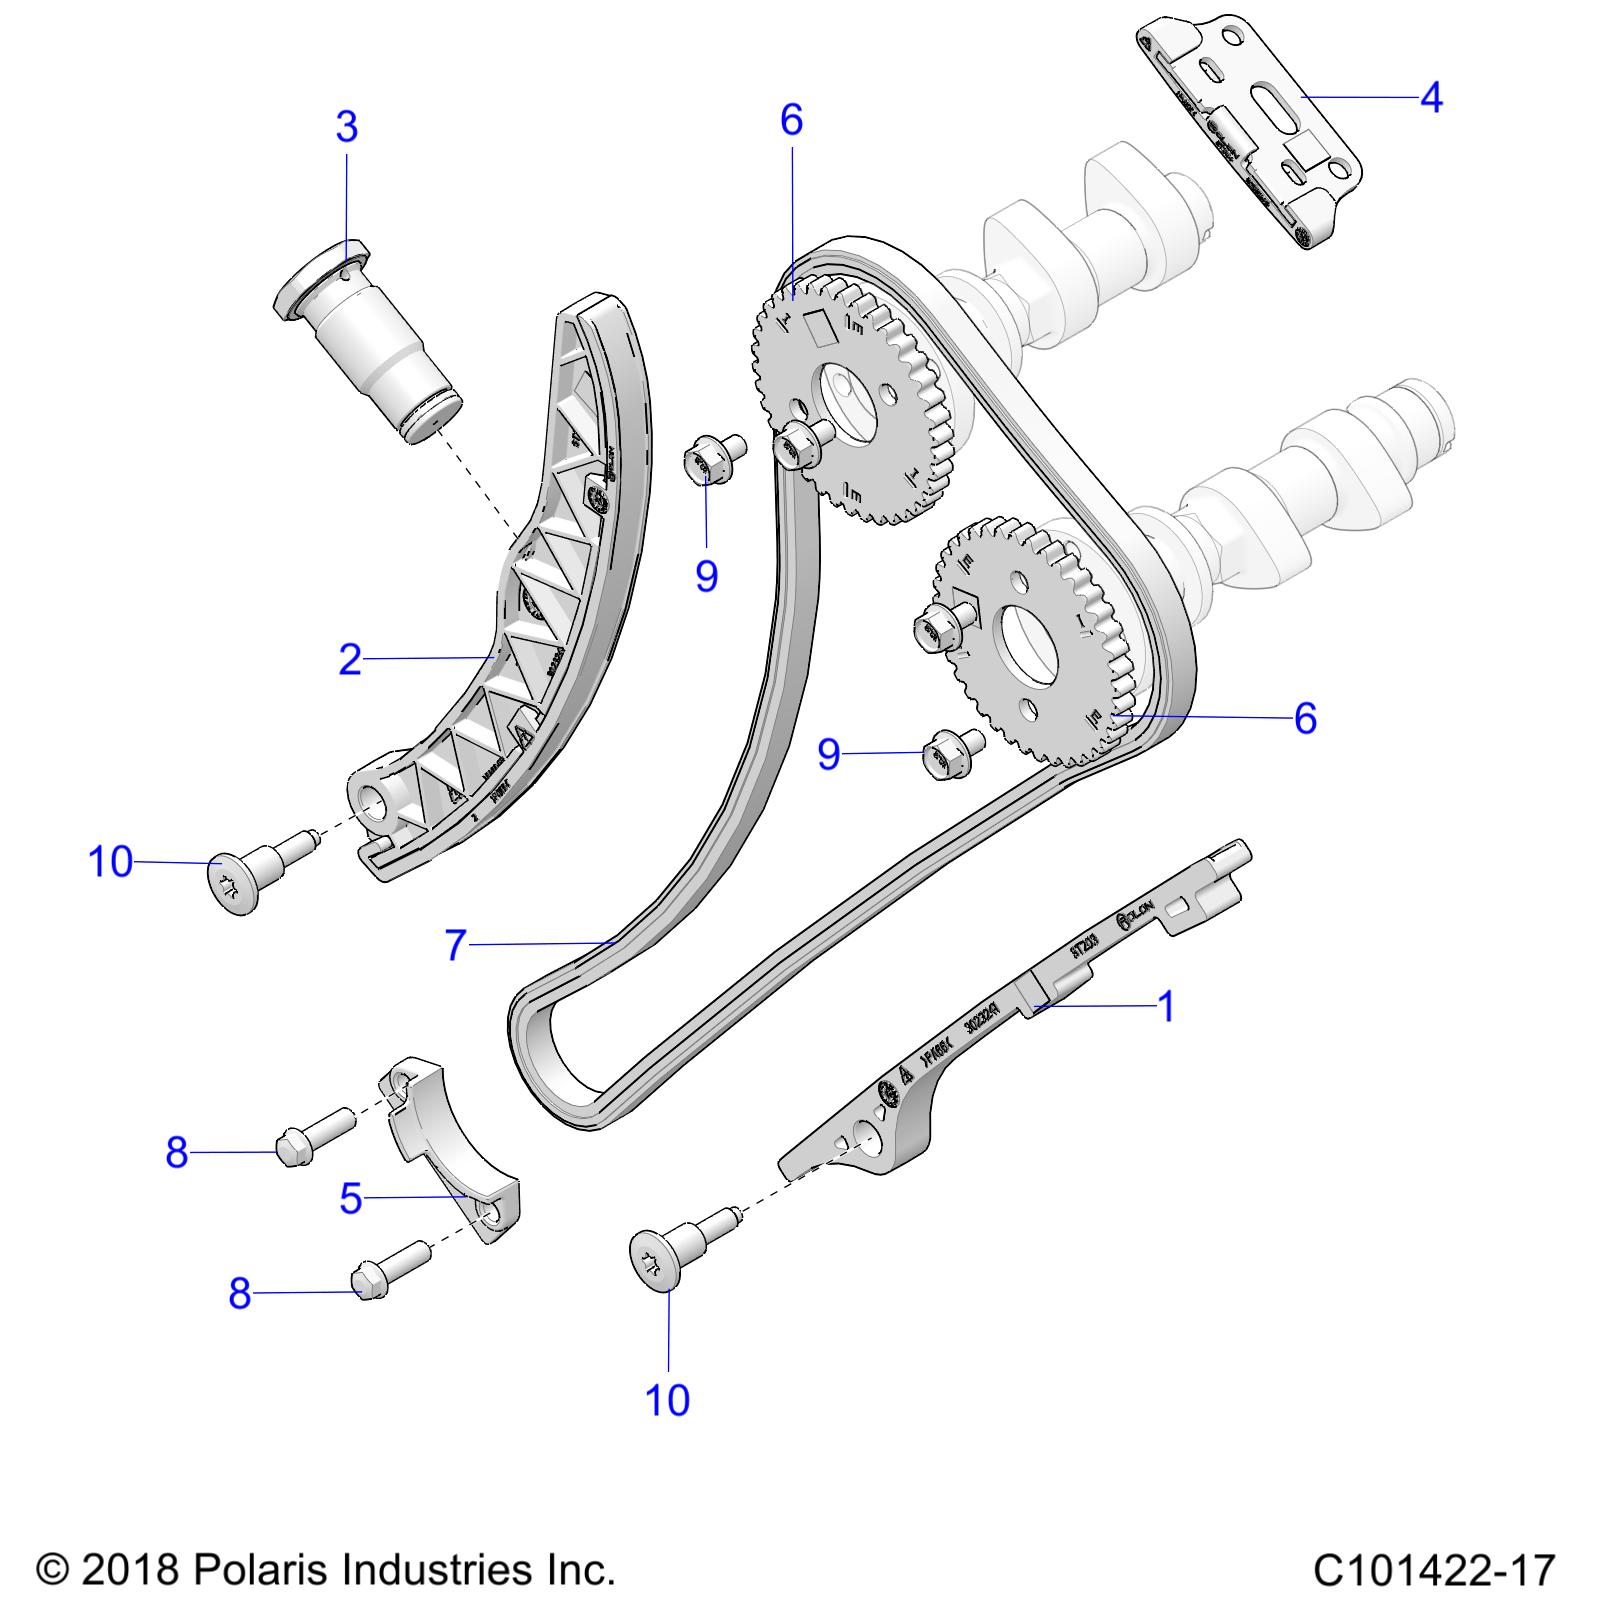 ENGINE, CAM CHAIN and SPROCKET - A20SUE57D5 (C101422-17)